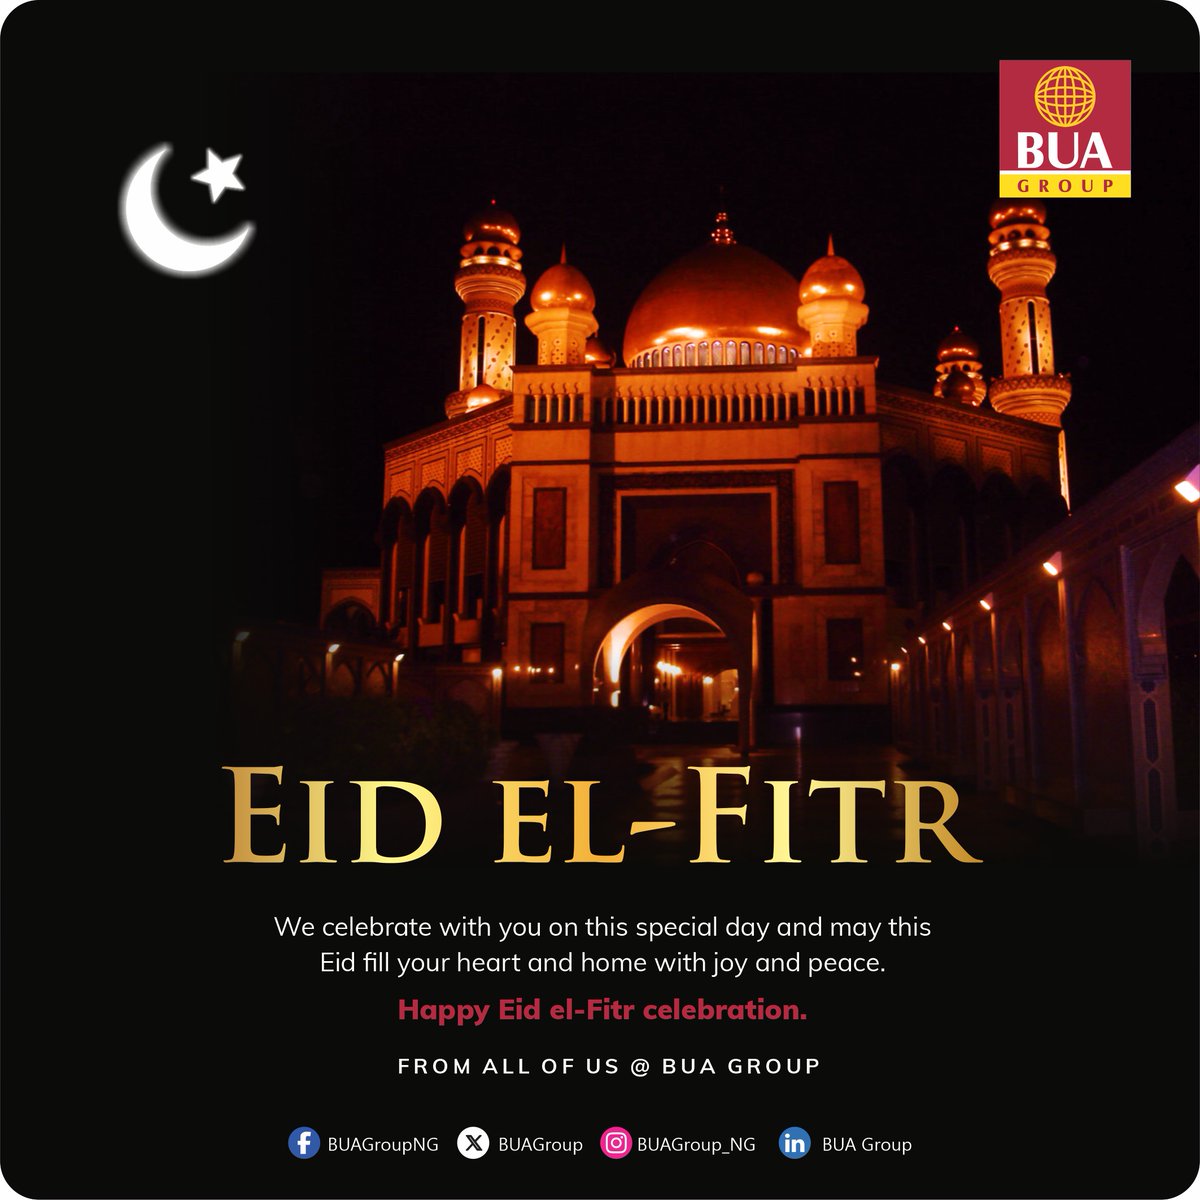 We celebrate with you on this special day and may this Eid fill your heart and home with joy and peace. Happy Eid el-Fitr celebration. From All of Us @ BUA Group #BUAGroup #UnlockingOpportunities #EidElFitr